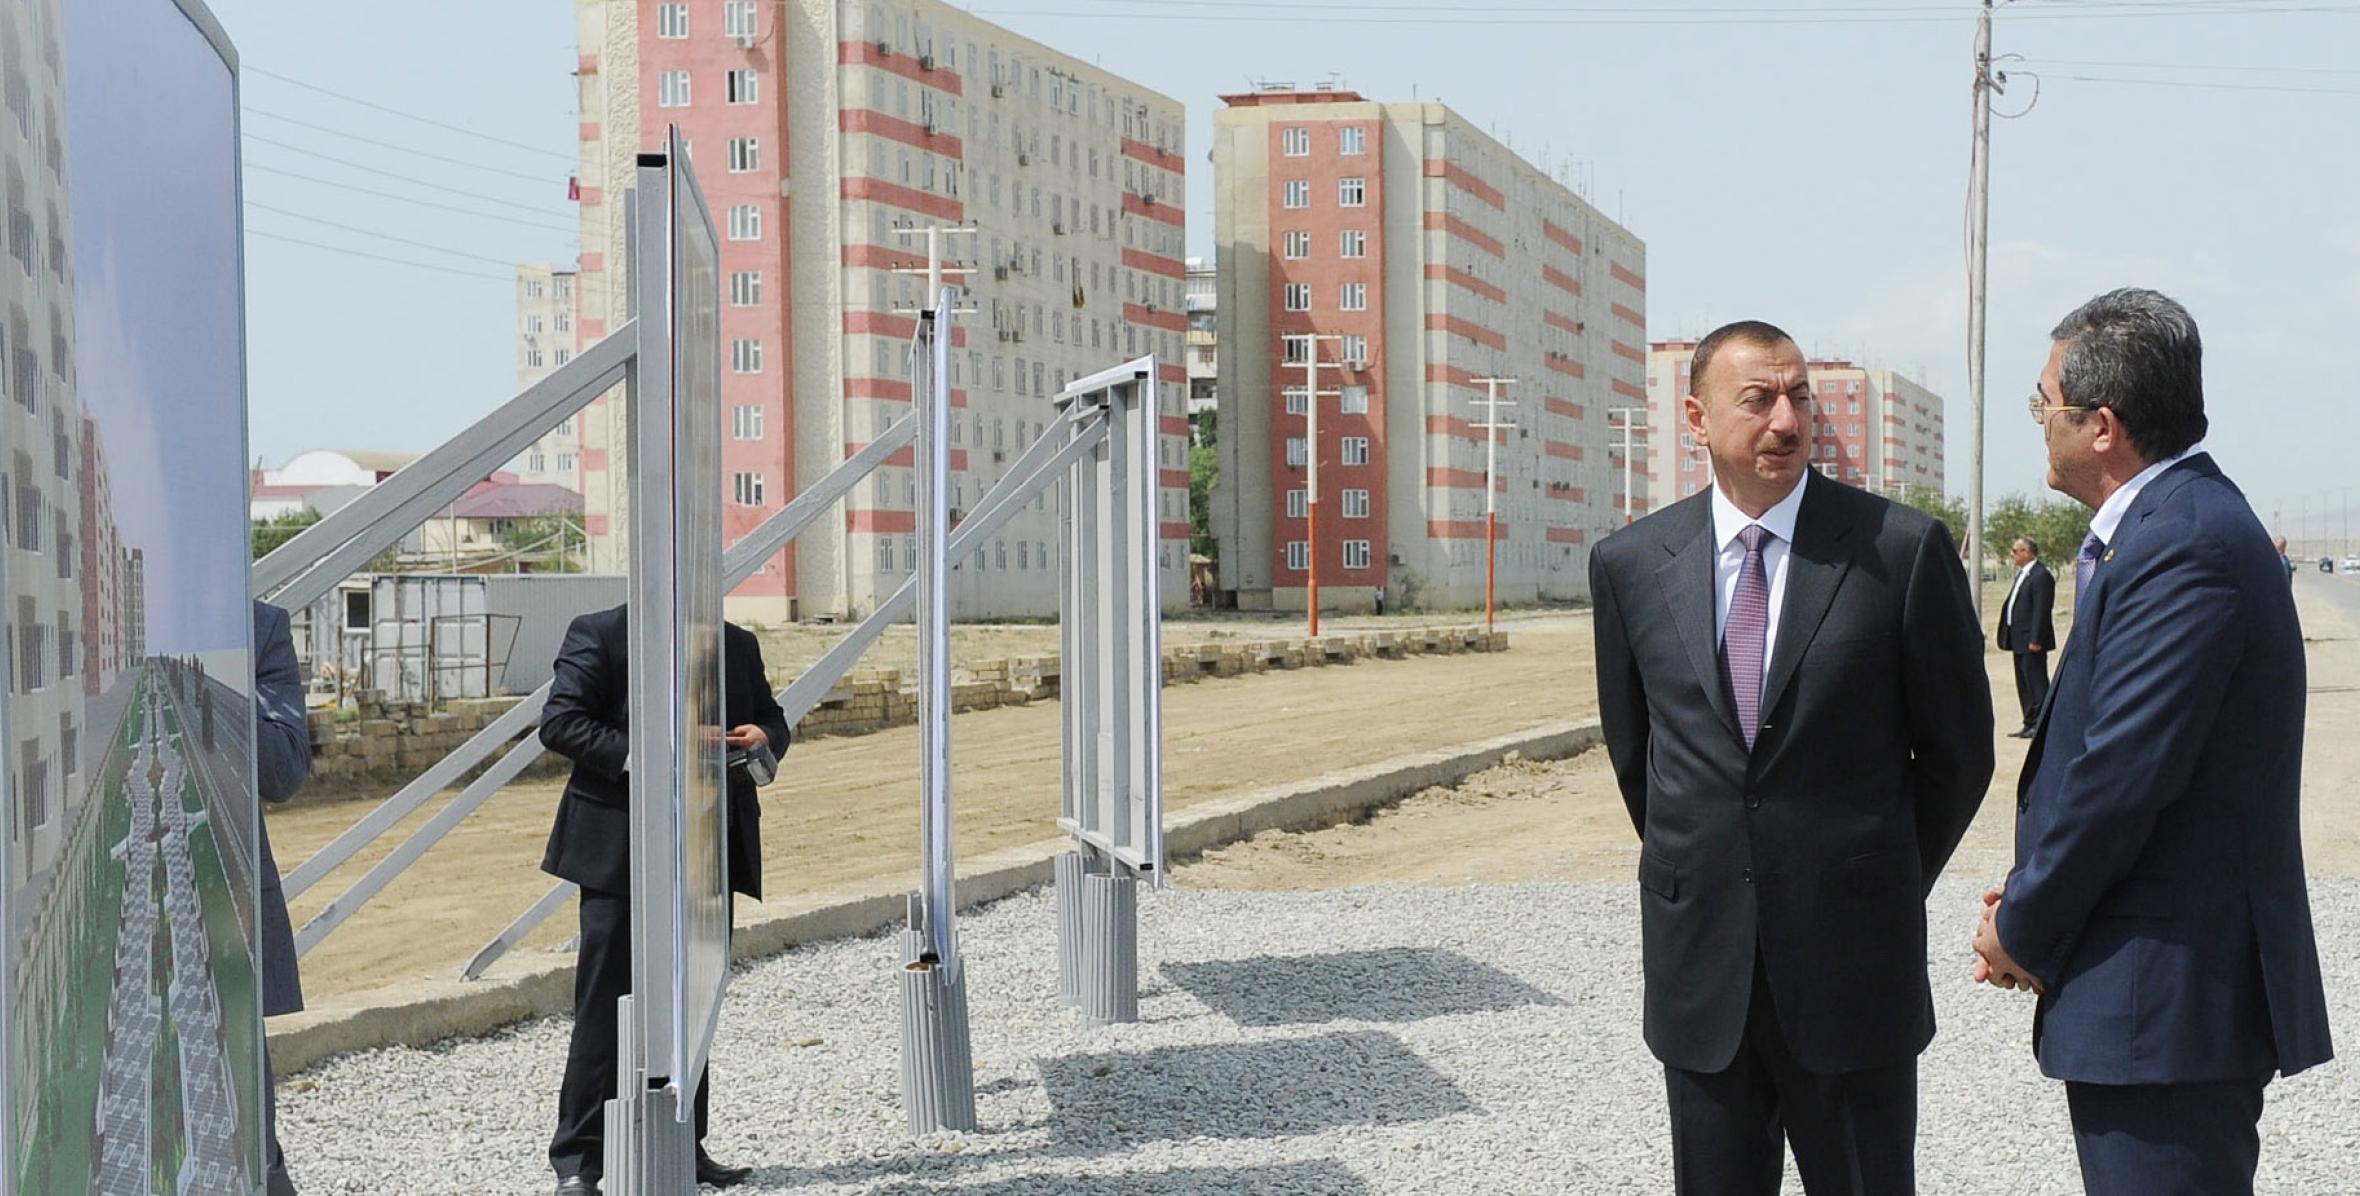 Ilham Aliyev reviewed an area in the Sahil settlement of the Garadagh district where a park is to be established